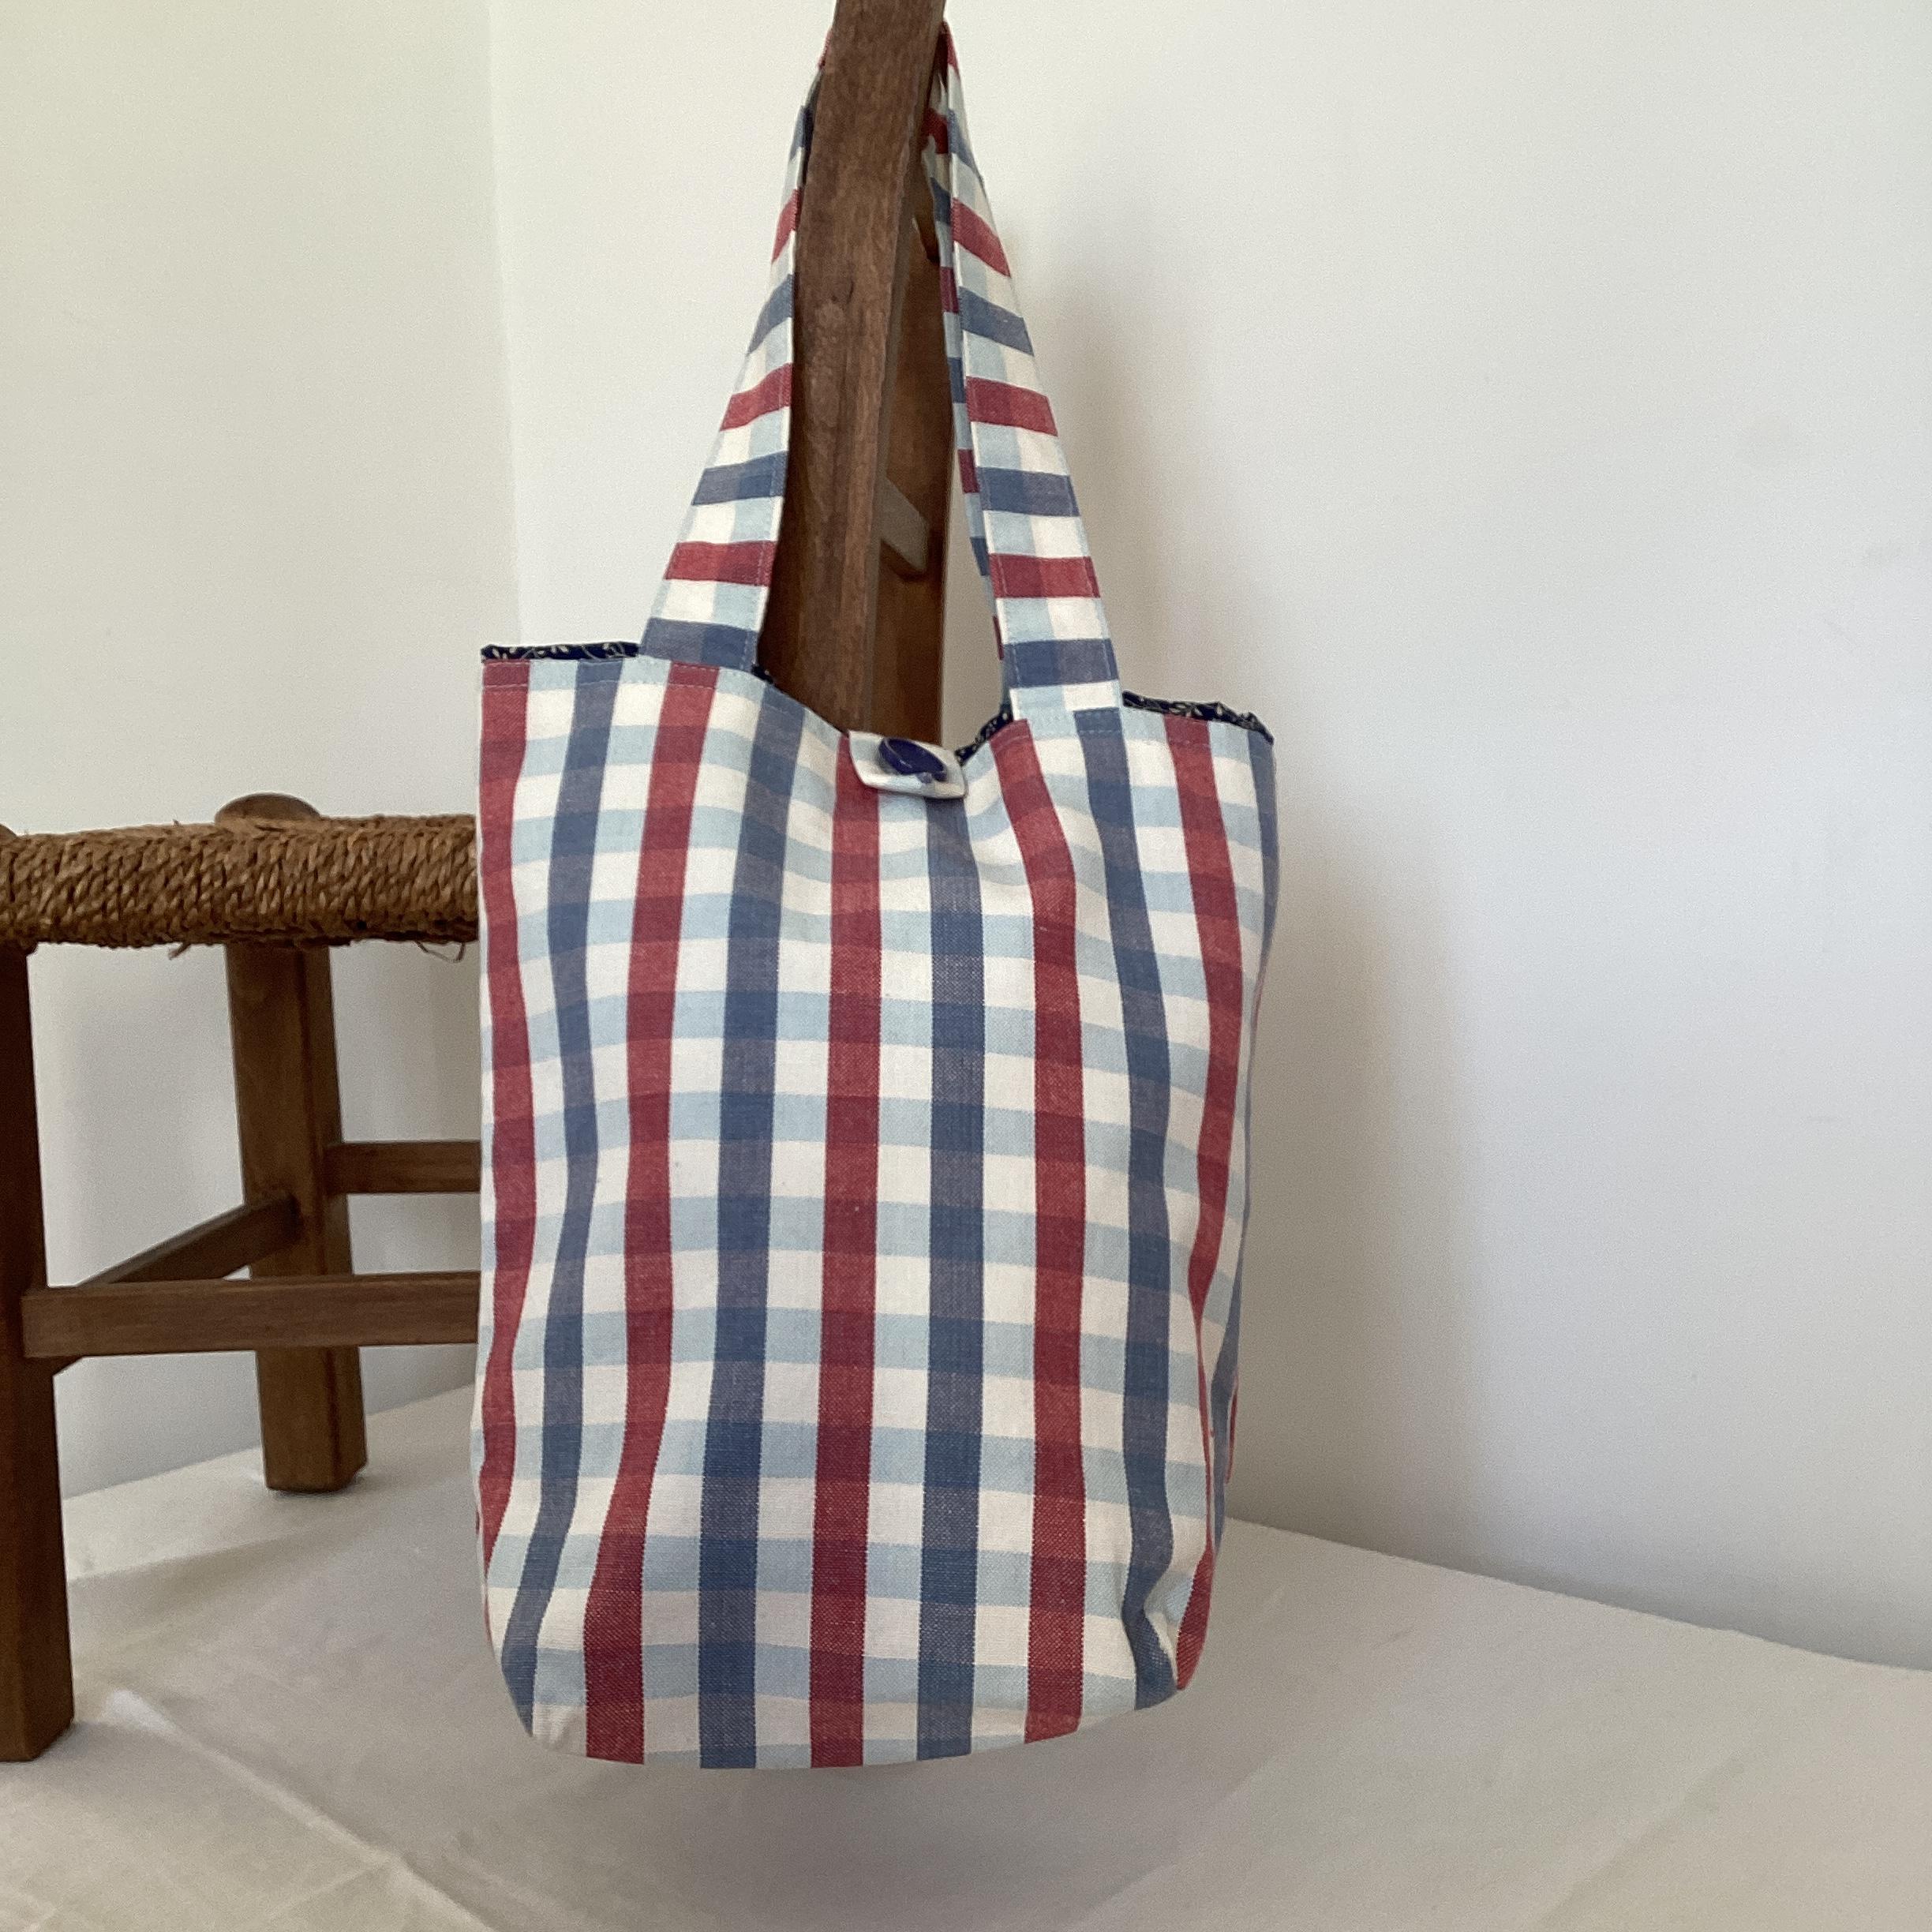 Tote Bag - red and blue check